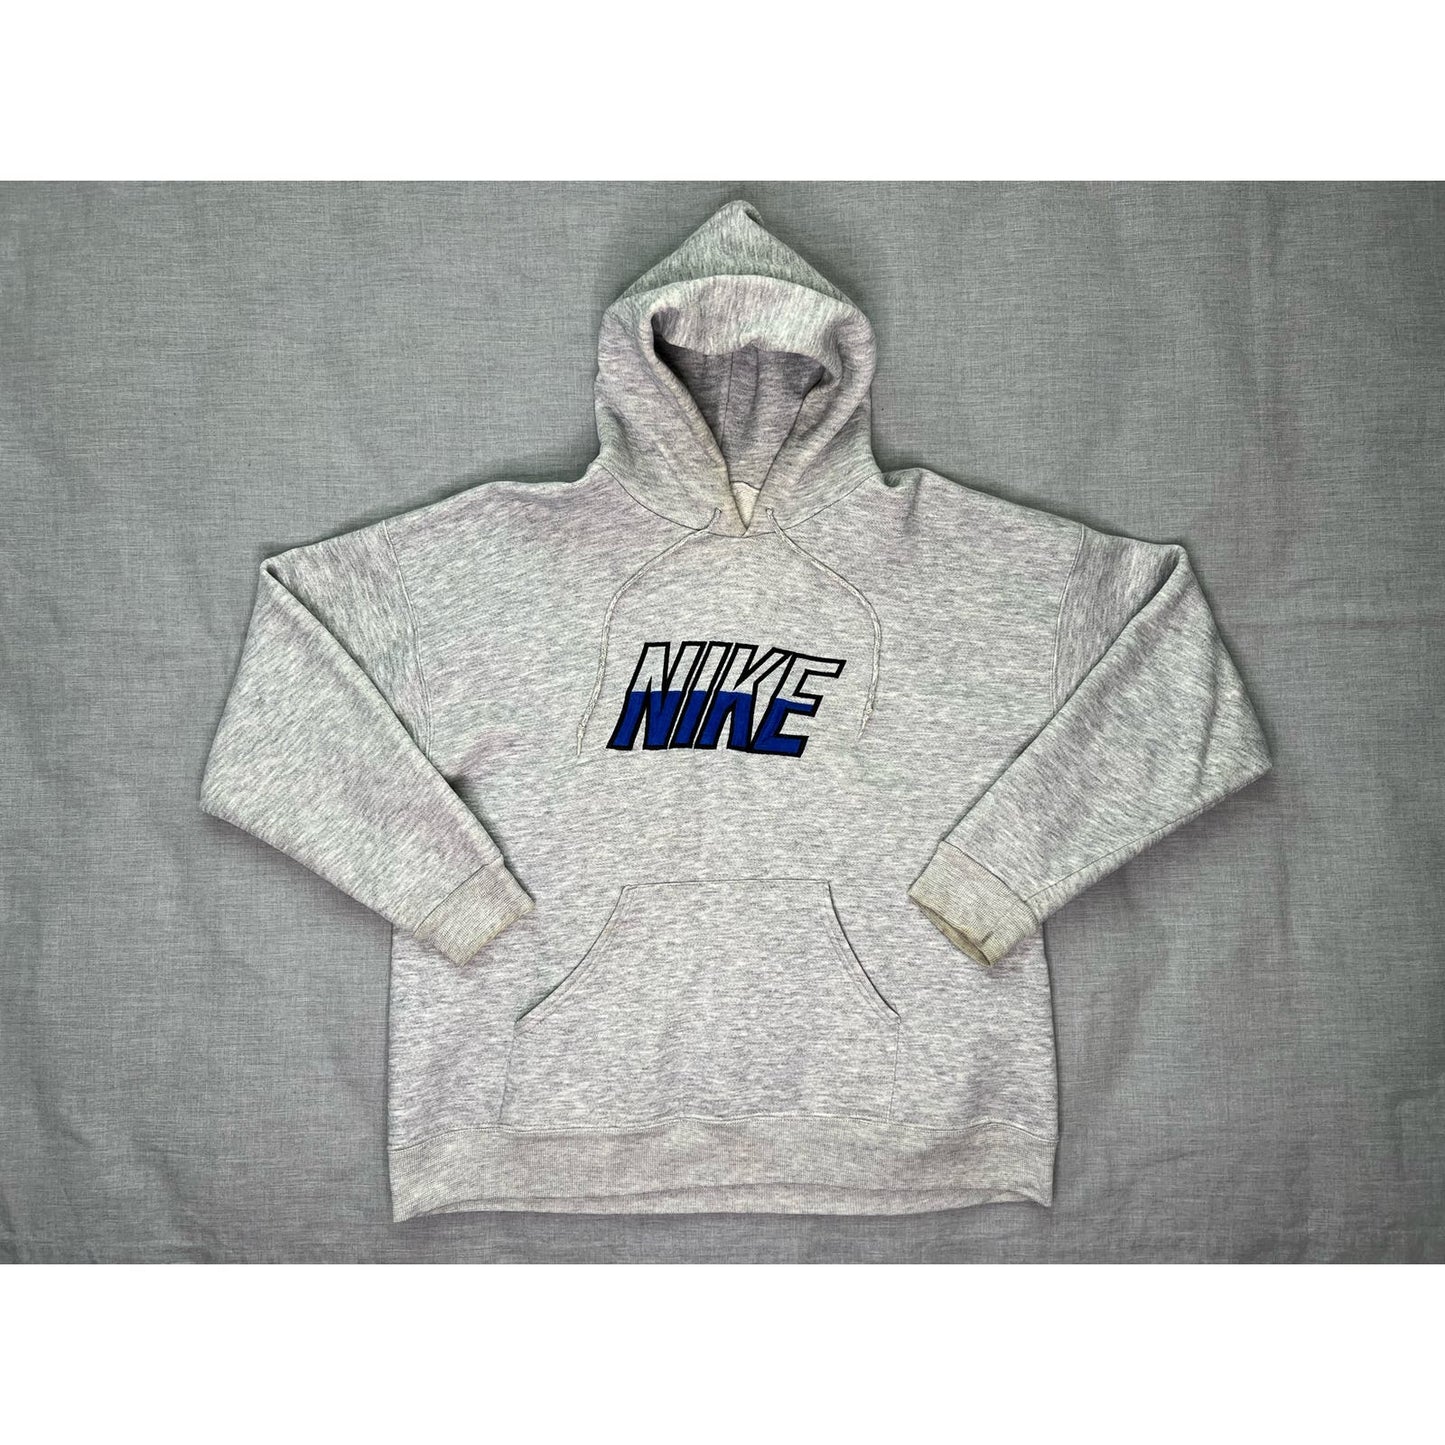 Vintage Nike Embroidered Pullover Hoodie XL